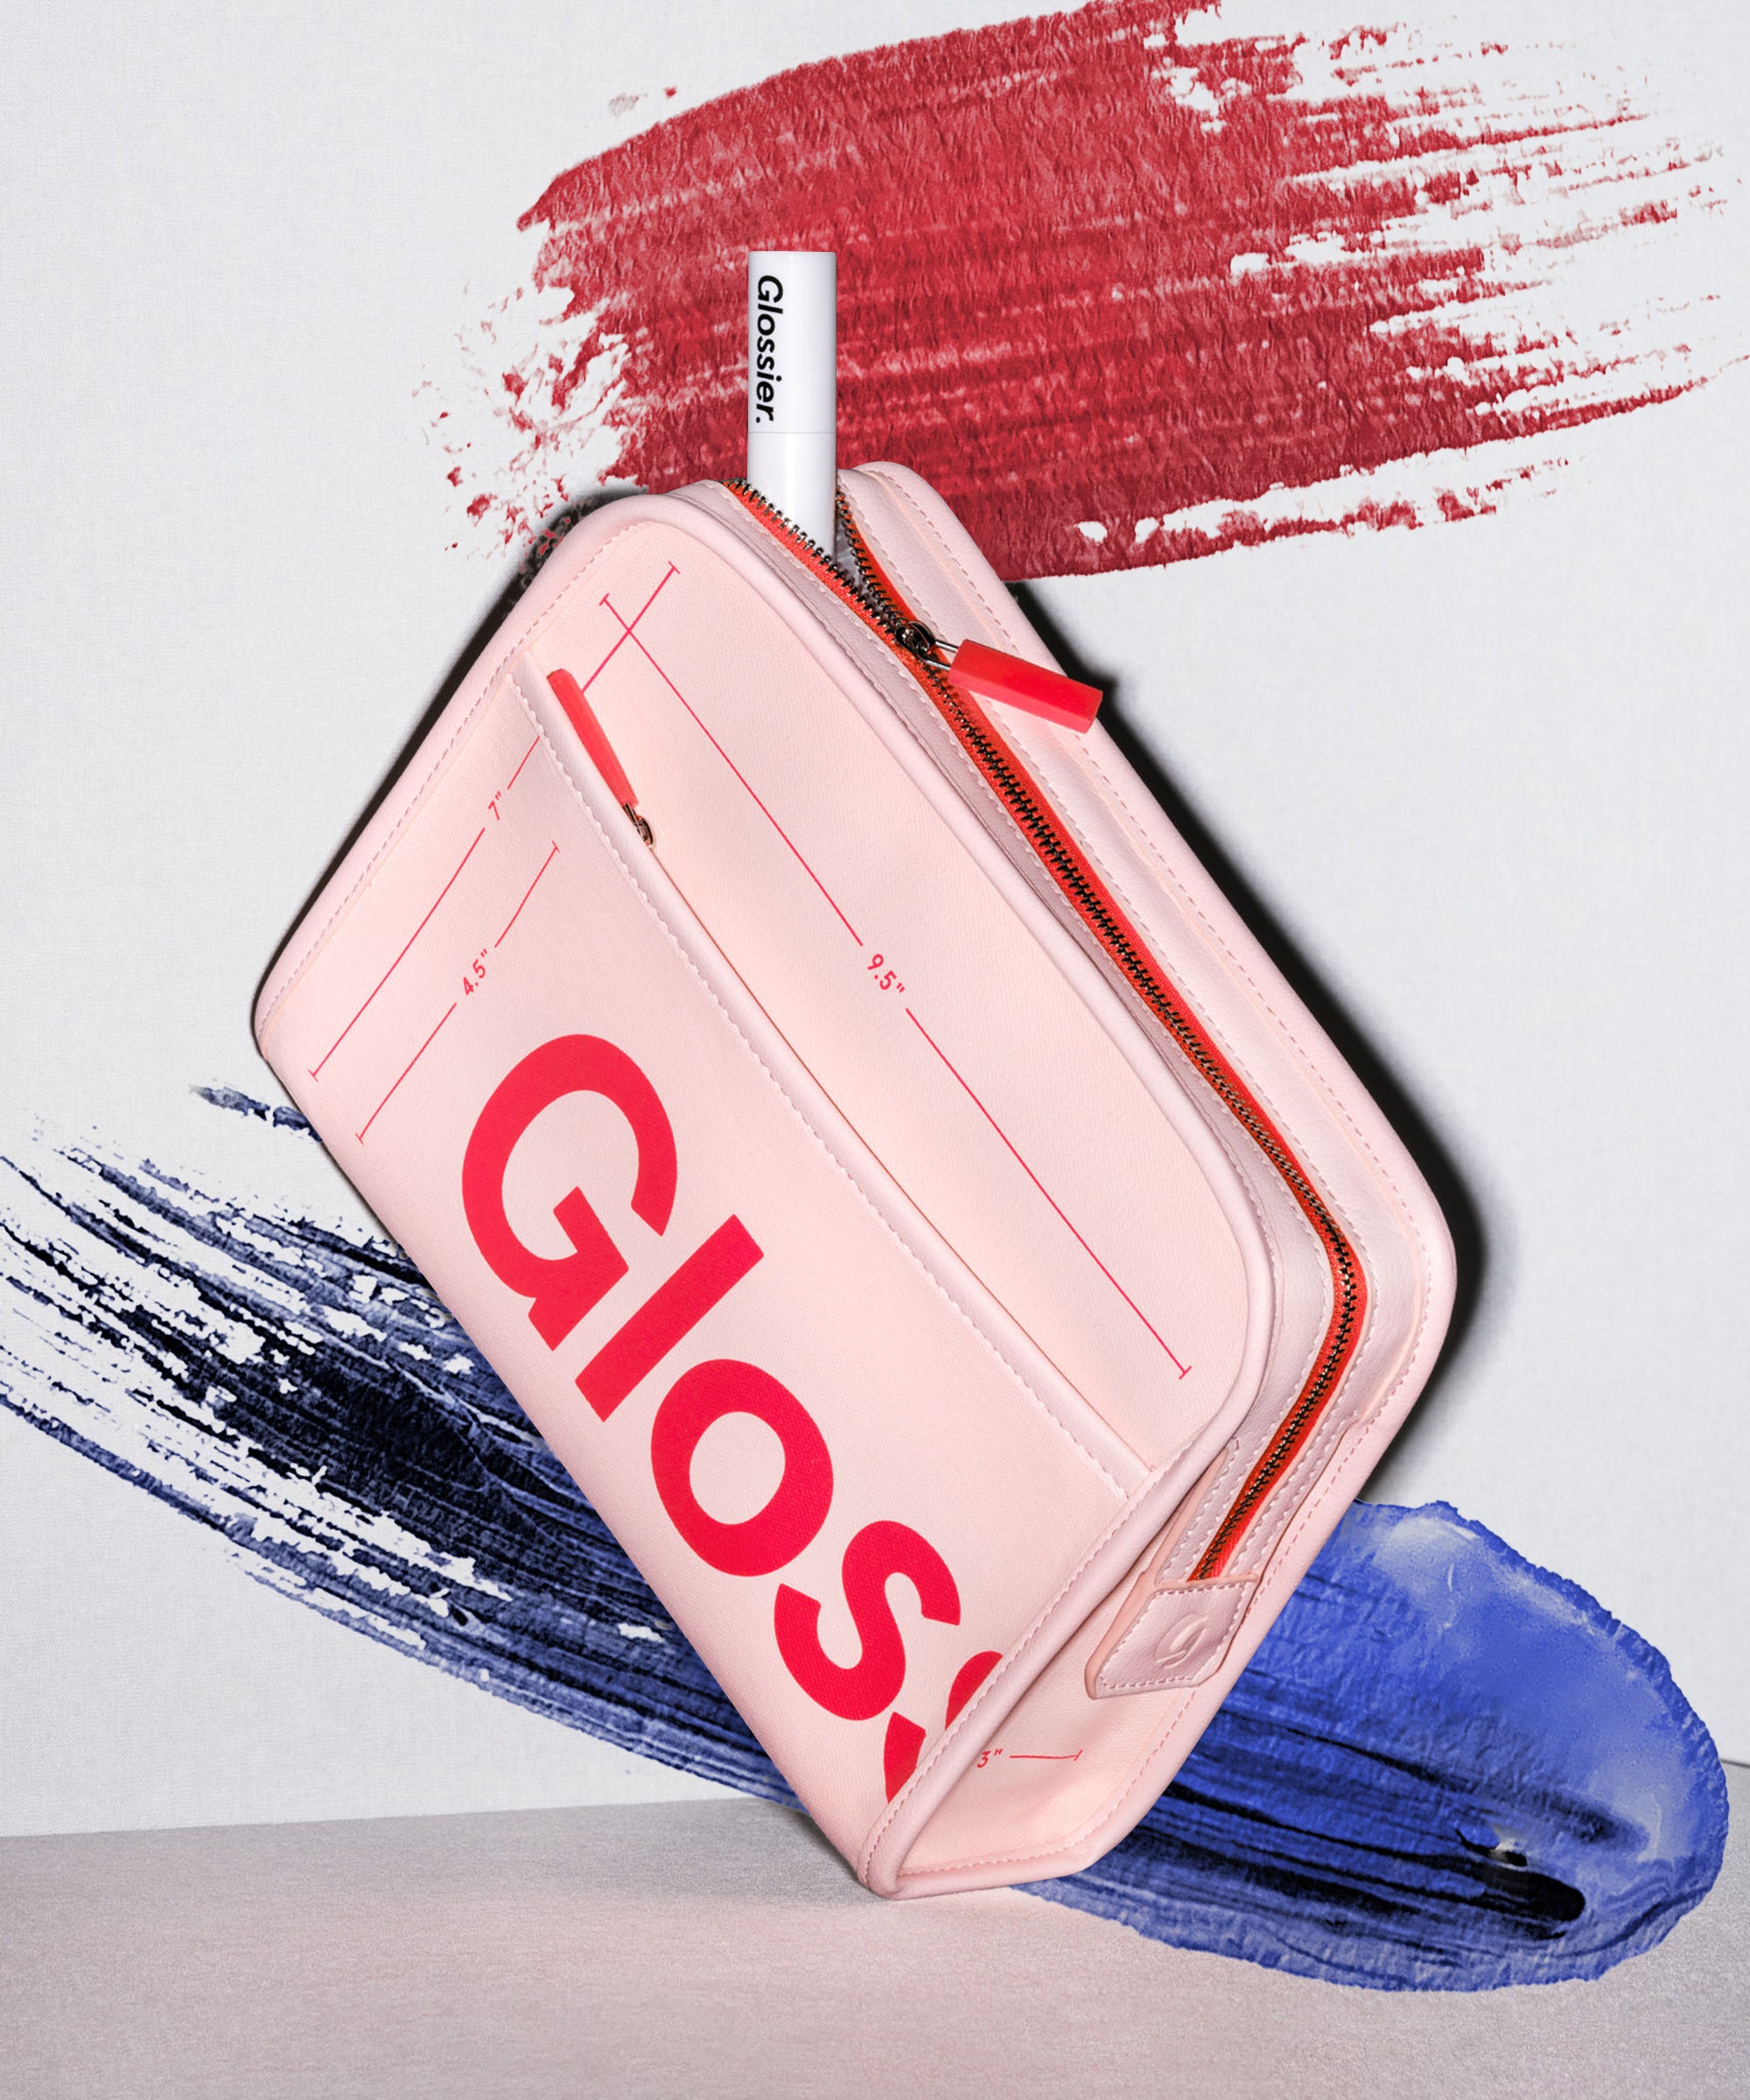 The Glossier Beauty Bag is back in stock — get it while its still here